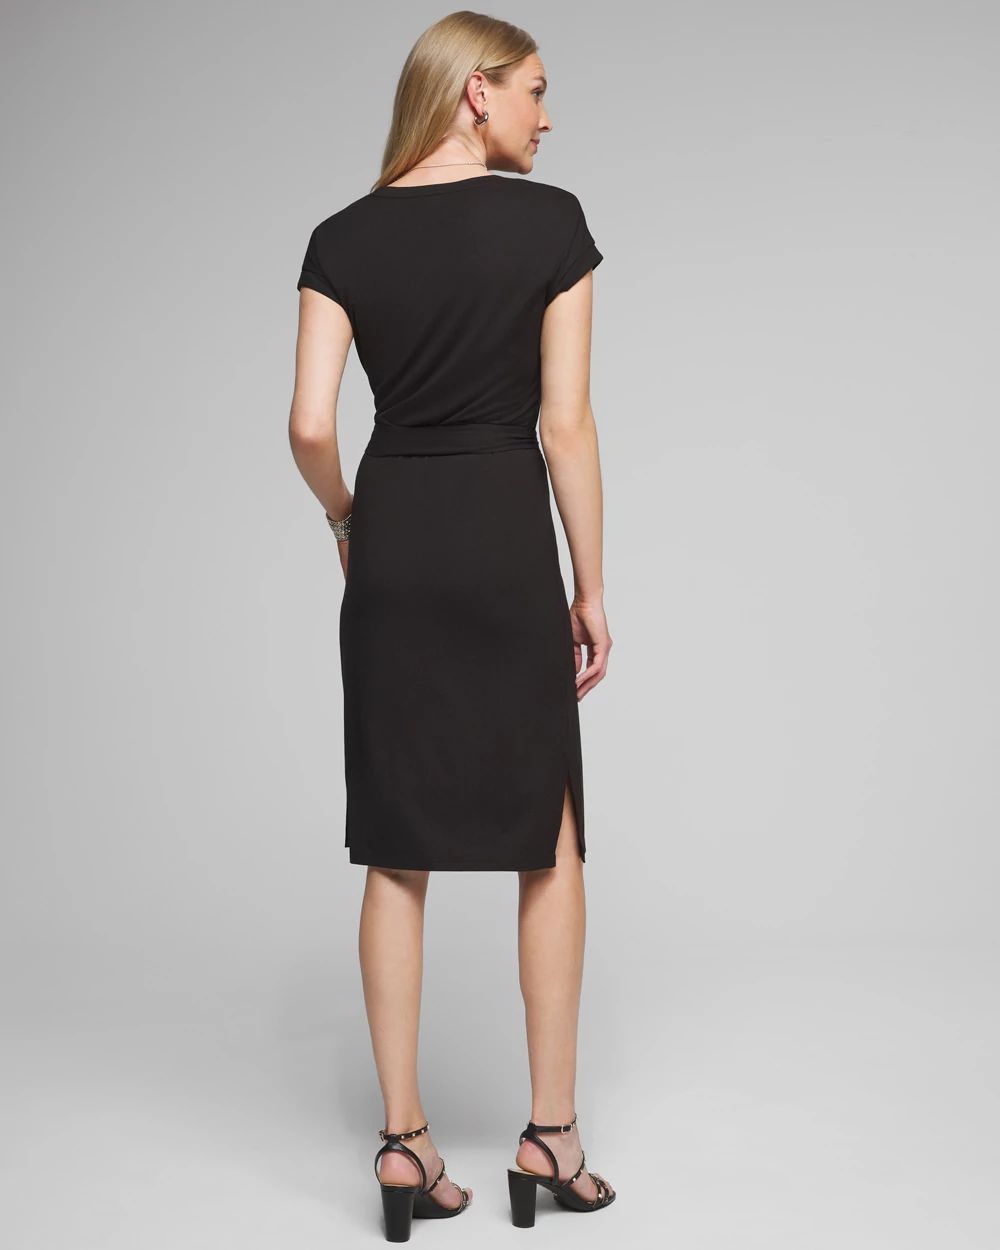 Outlet WHBM T-Shirt Midi Dress click to view larger image.